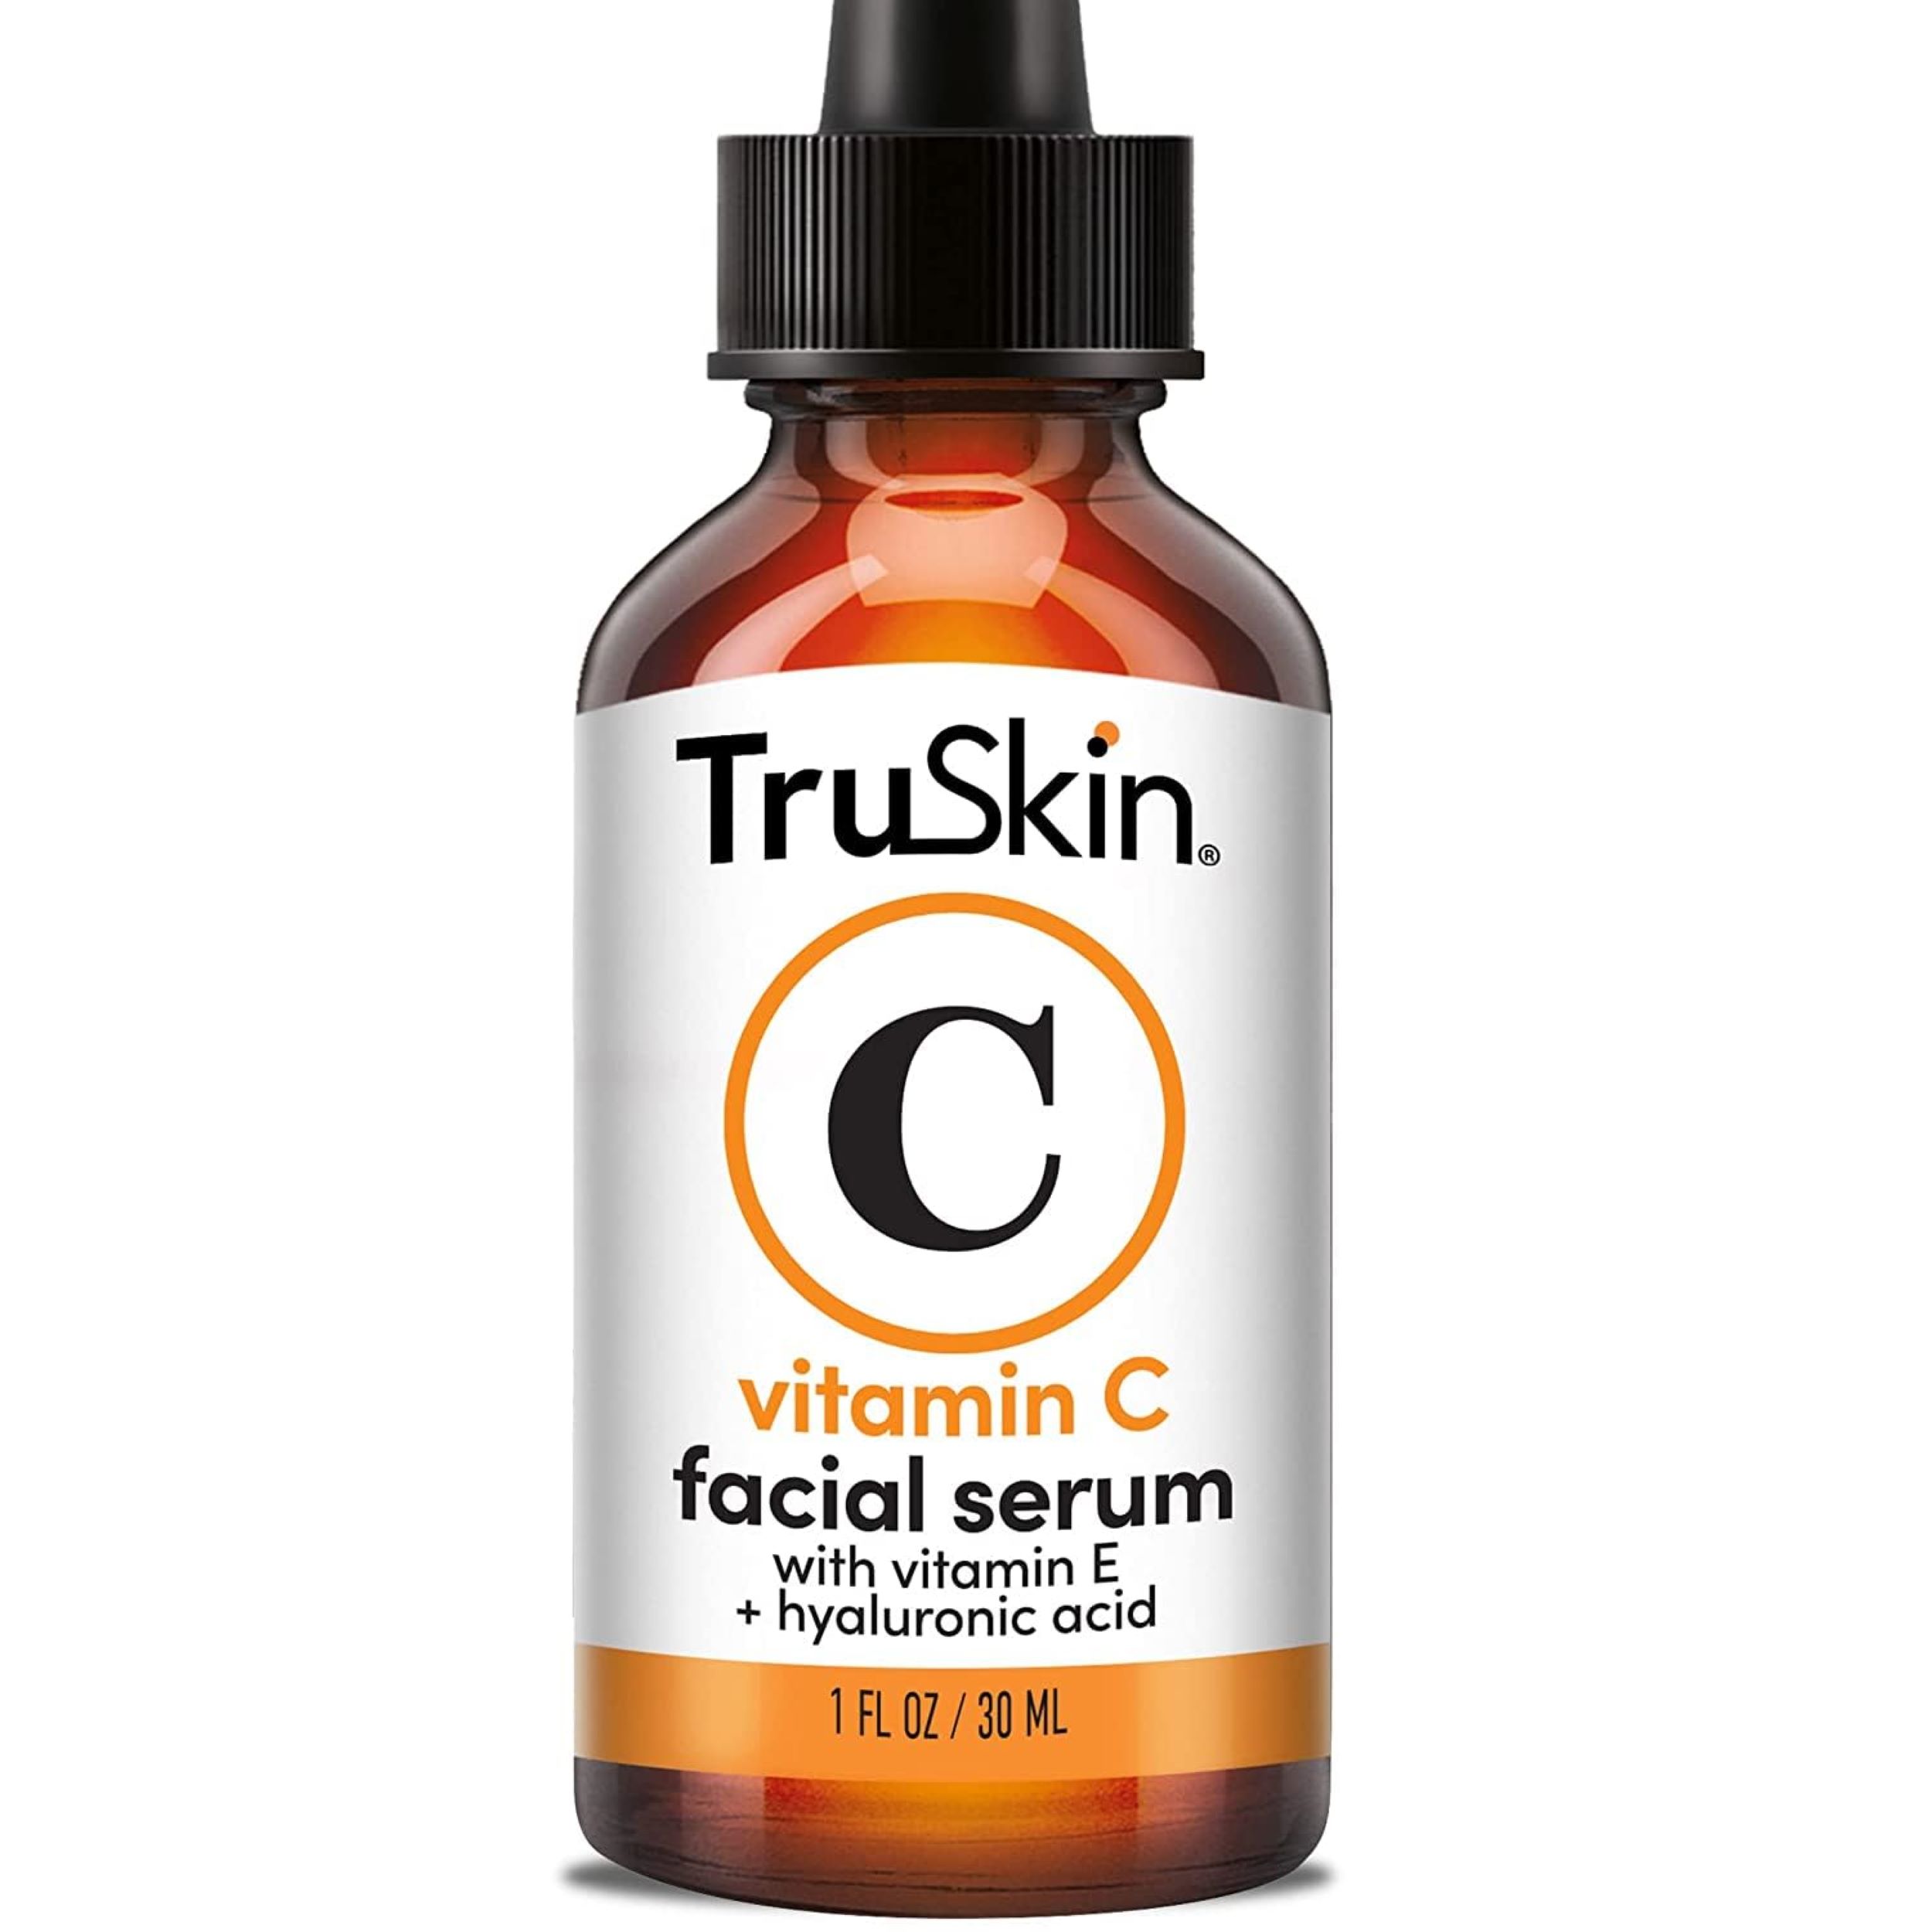 TruSkin Vitamin C Serum for Face – Anti Aging Face Serum with Vitamin C, Hyaluronic Acid, All Skin Types, 1 fl oz - image 3 of 12